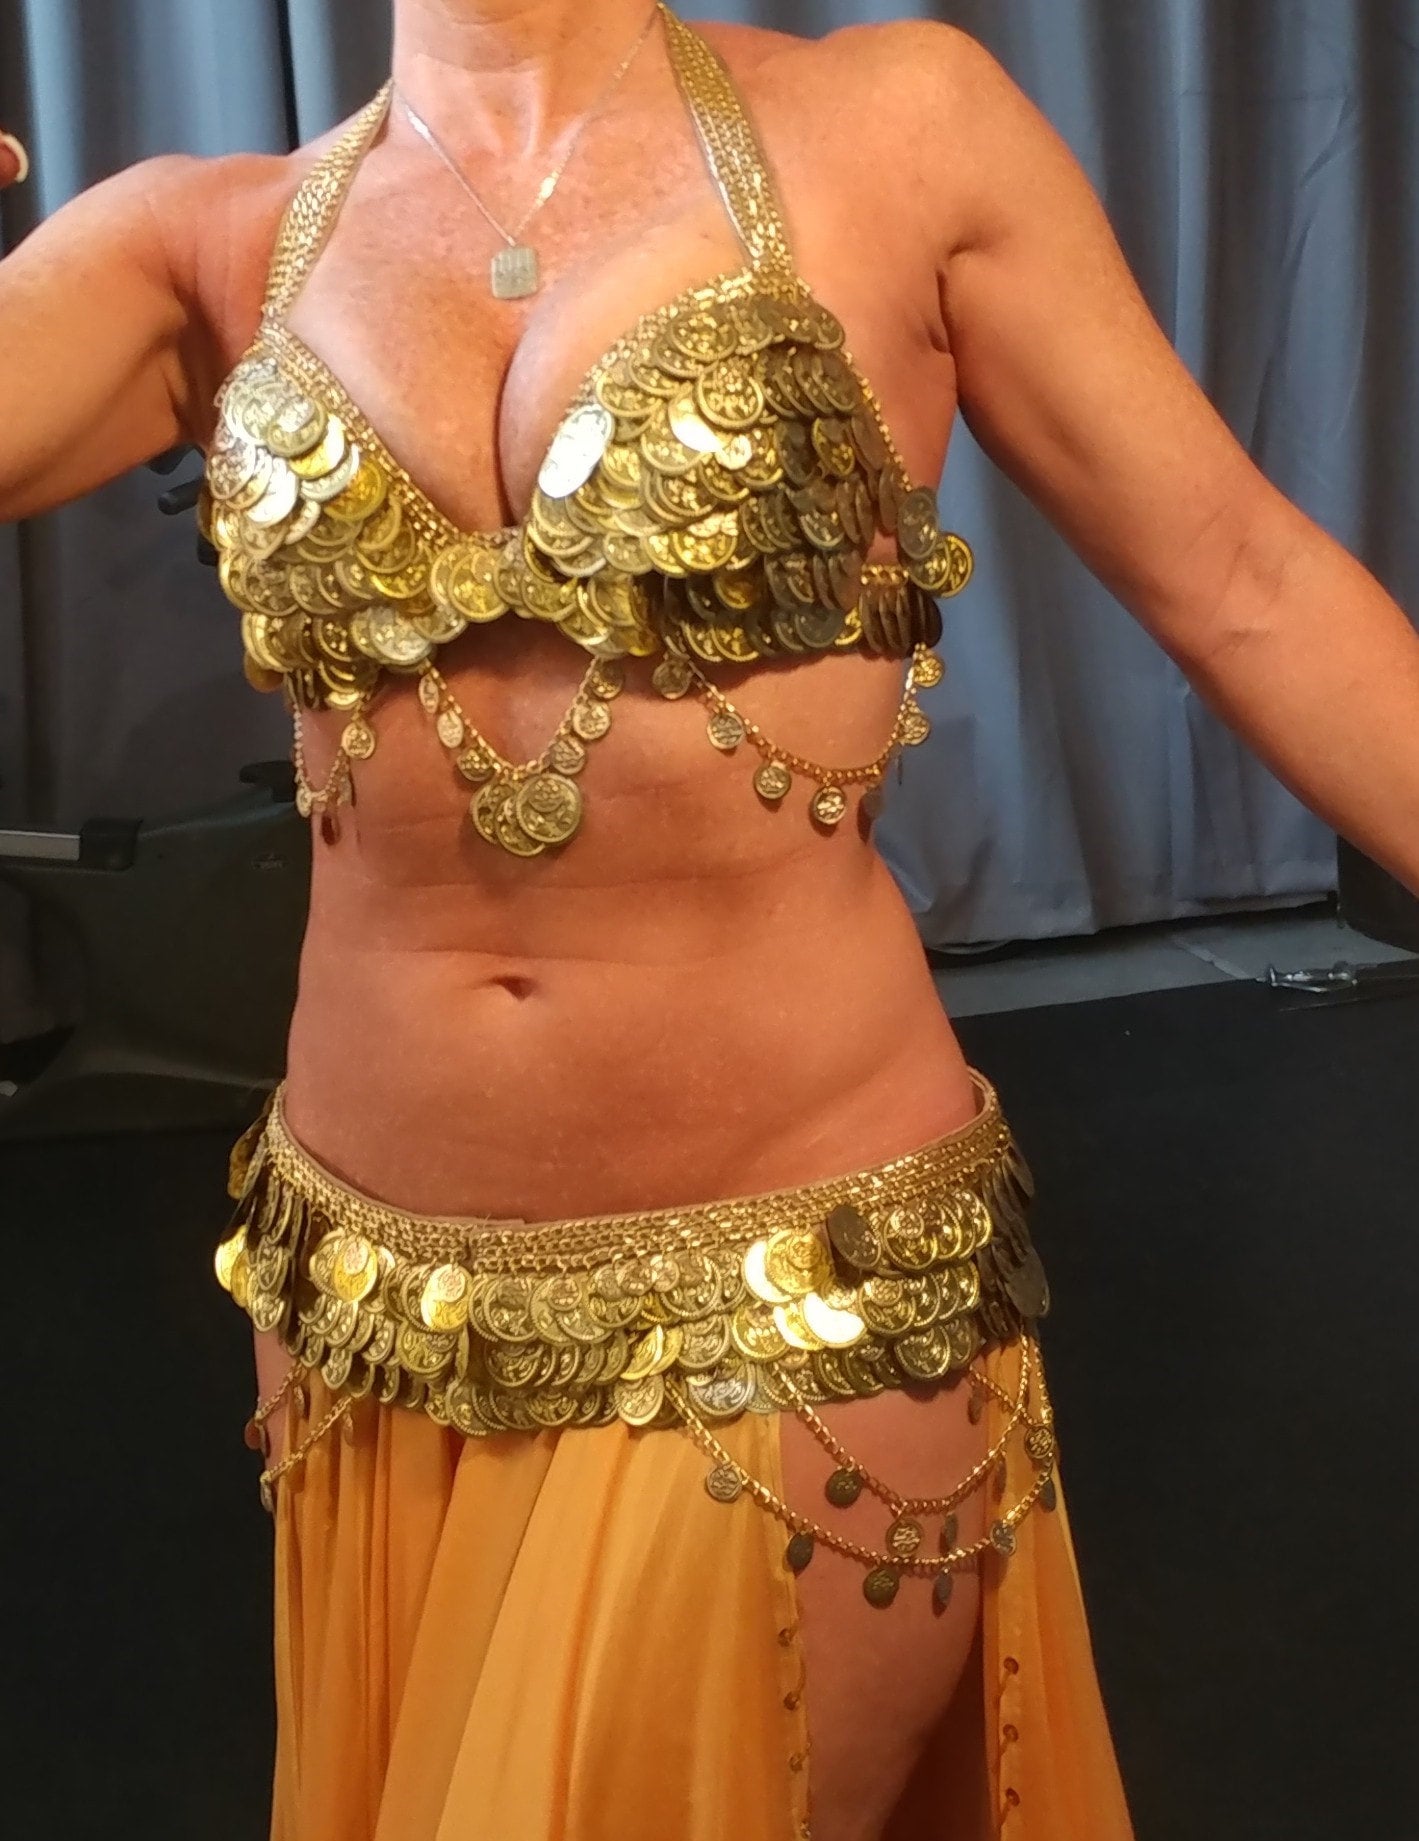 DIY Belly Dance Coin Costume Video Instructions